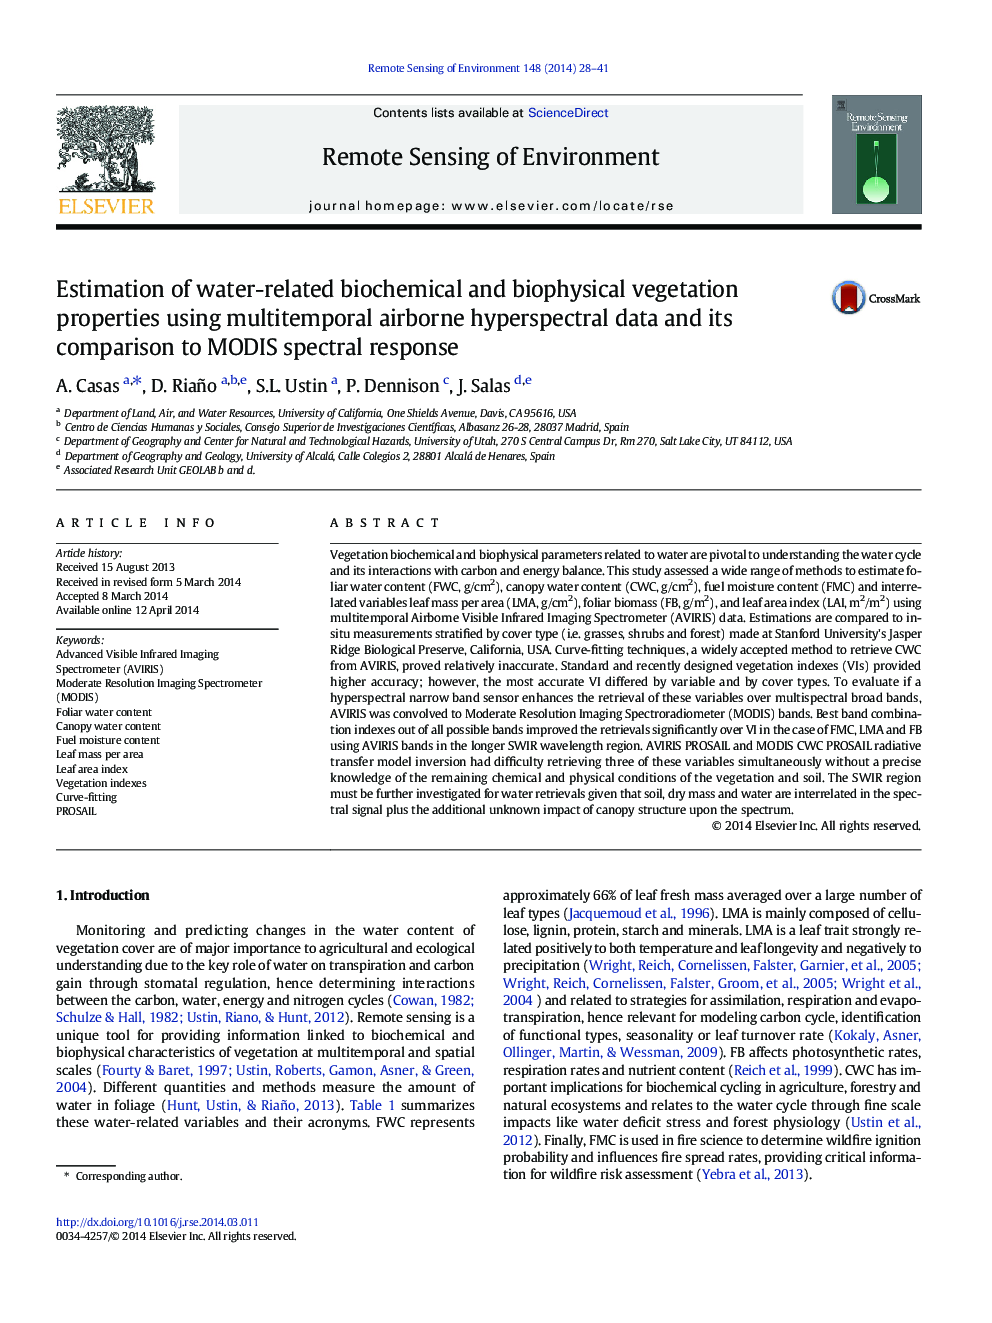 Estimation of water-related biochemical and biophysical vegetation properties using multitemporal airborne hyperspectral data and its comparison to MODIS spectral response